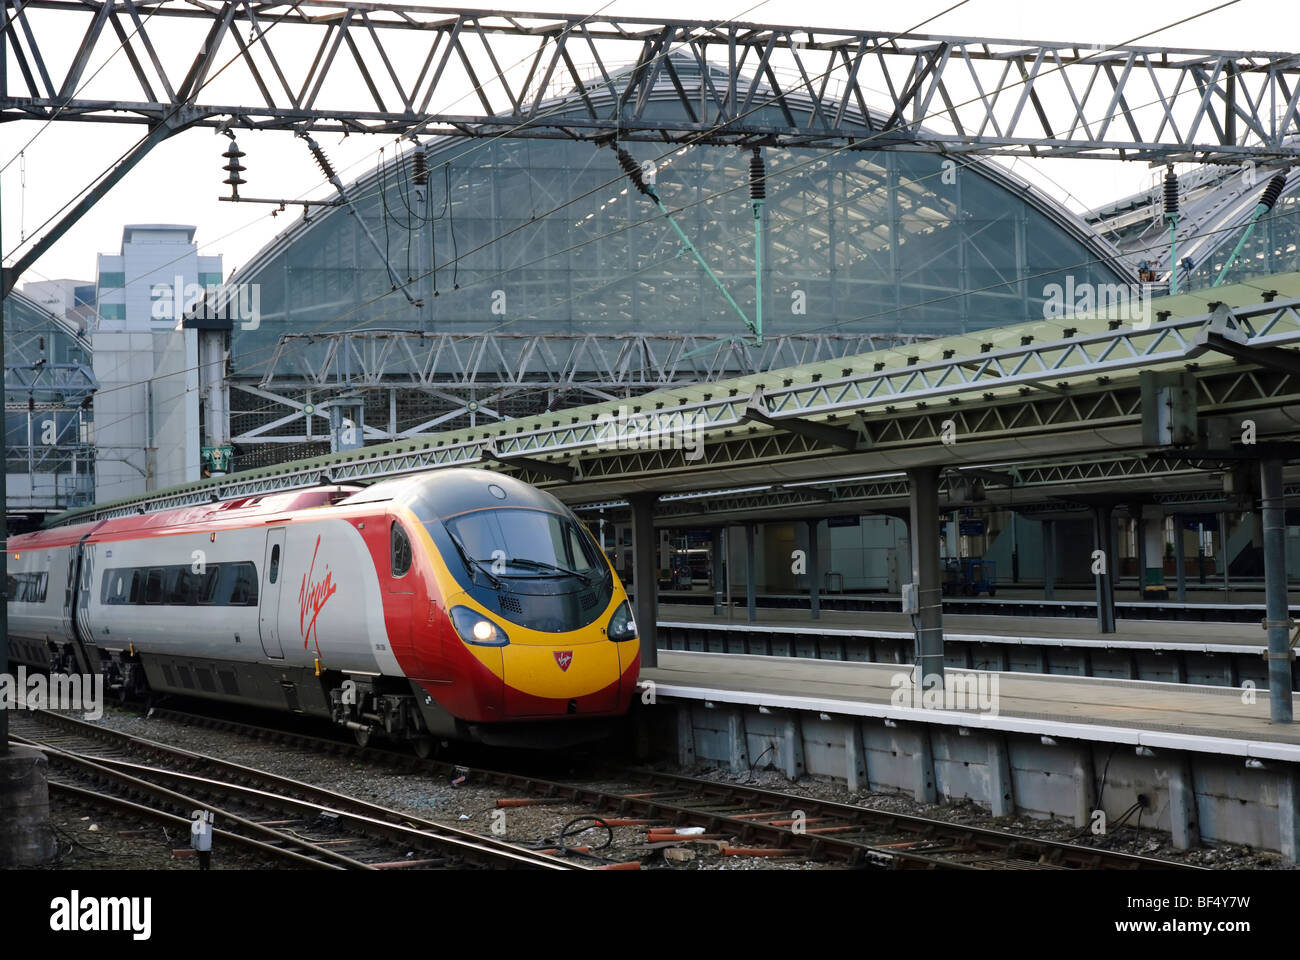 Intercity express train at a station. Virgin Trains Pendolino Express train at Manchester Piccadilly Station. Fast train. Electric power. Railway. Stock Photo